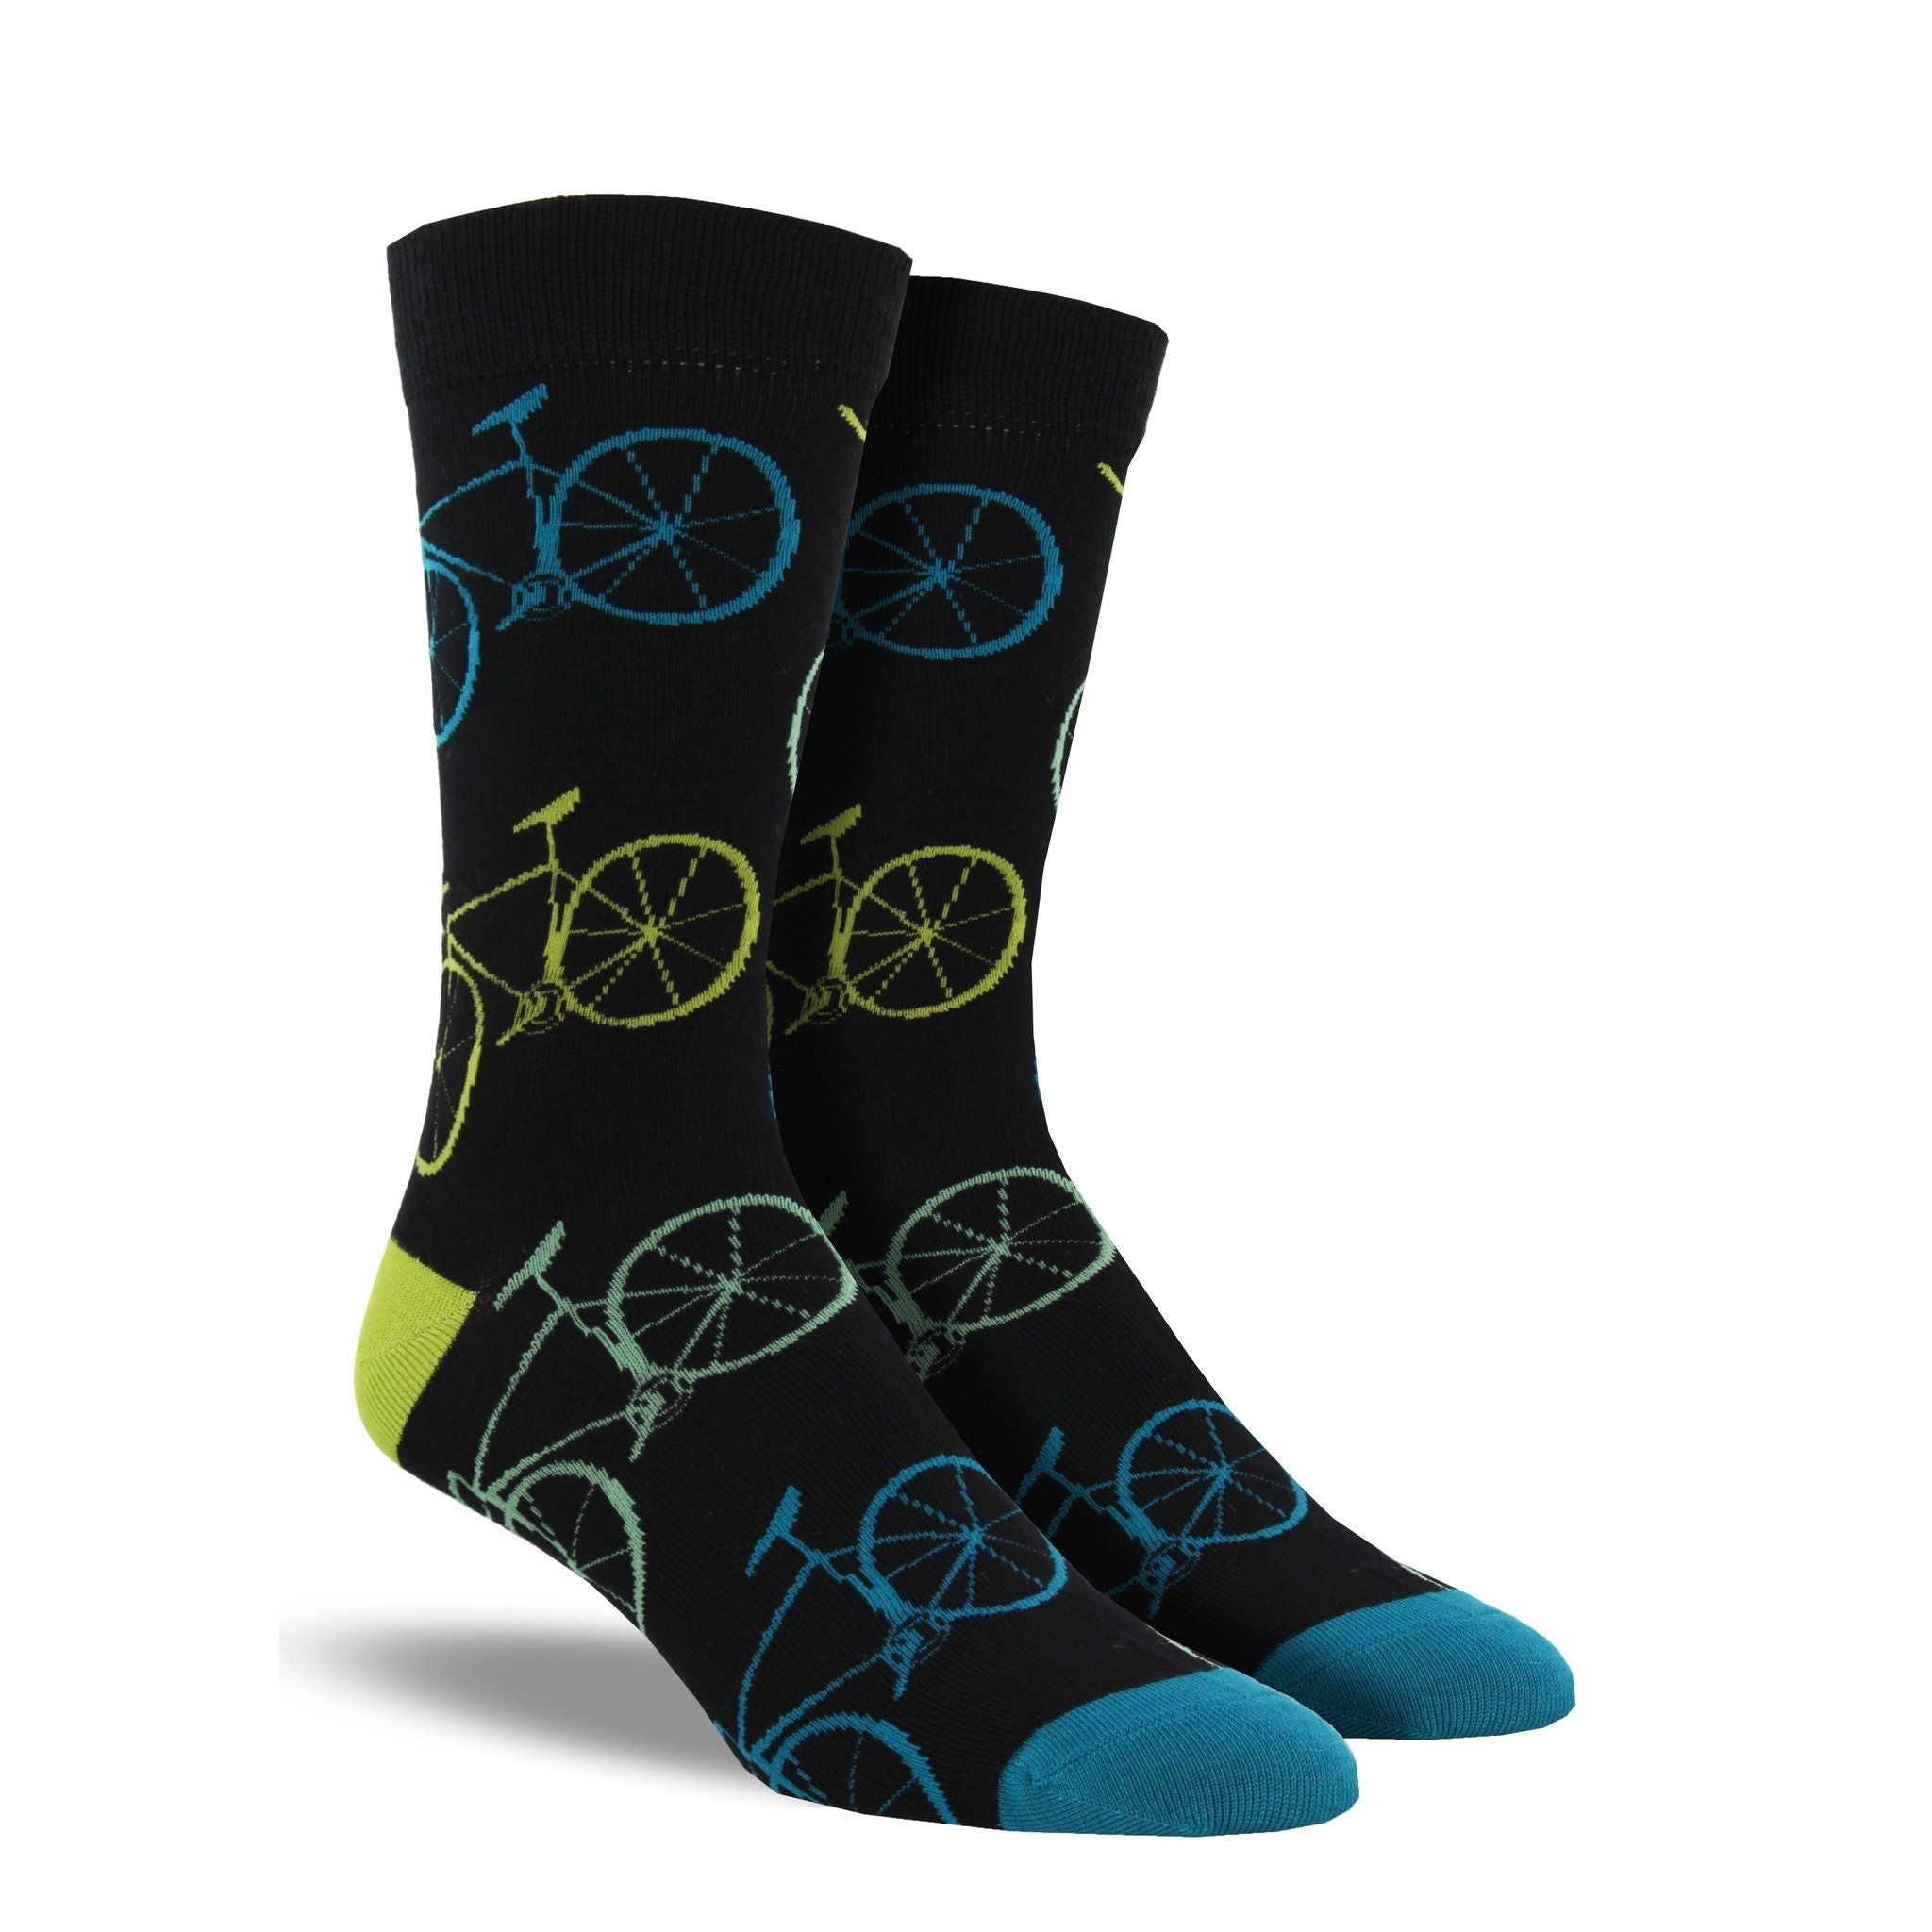 A pair of men's black crew socks with blue and lime bikes on them.